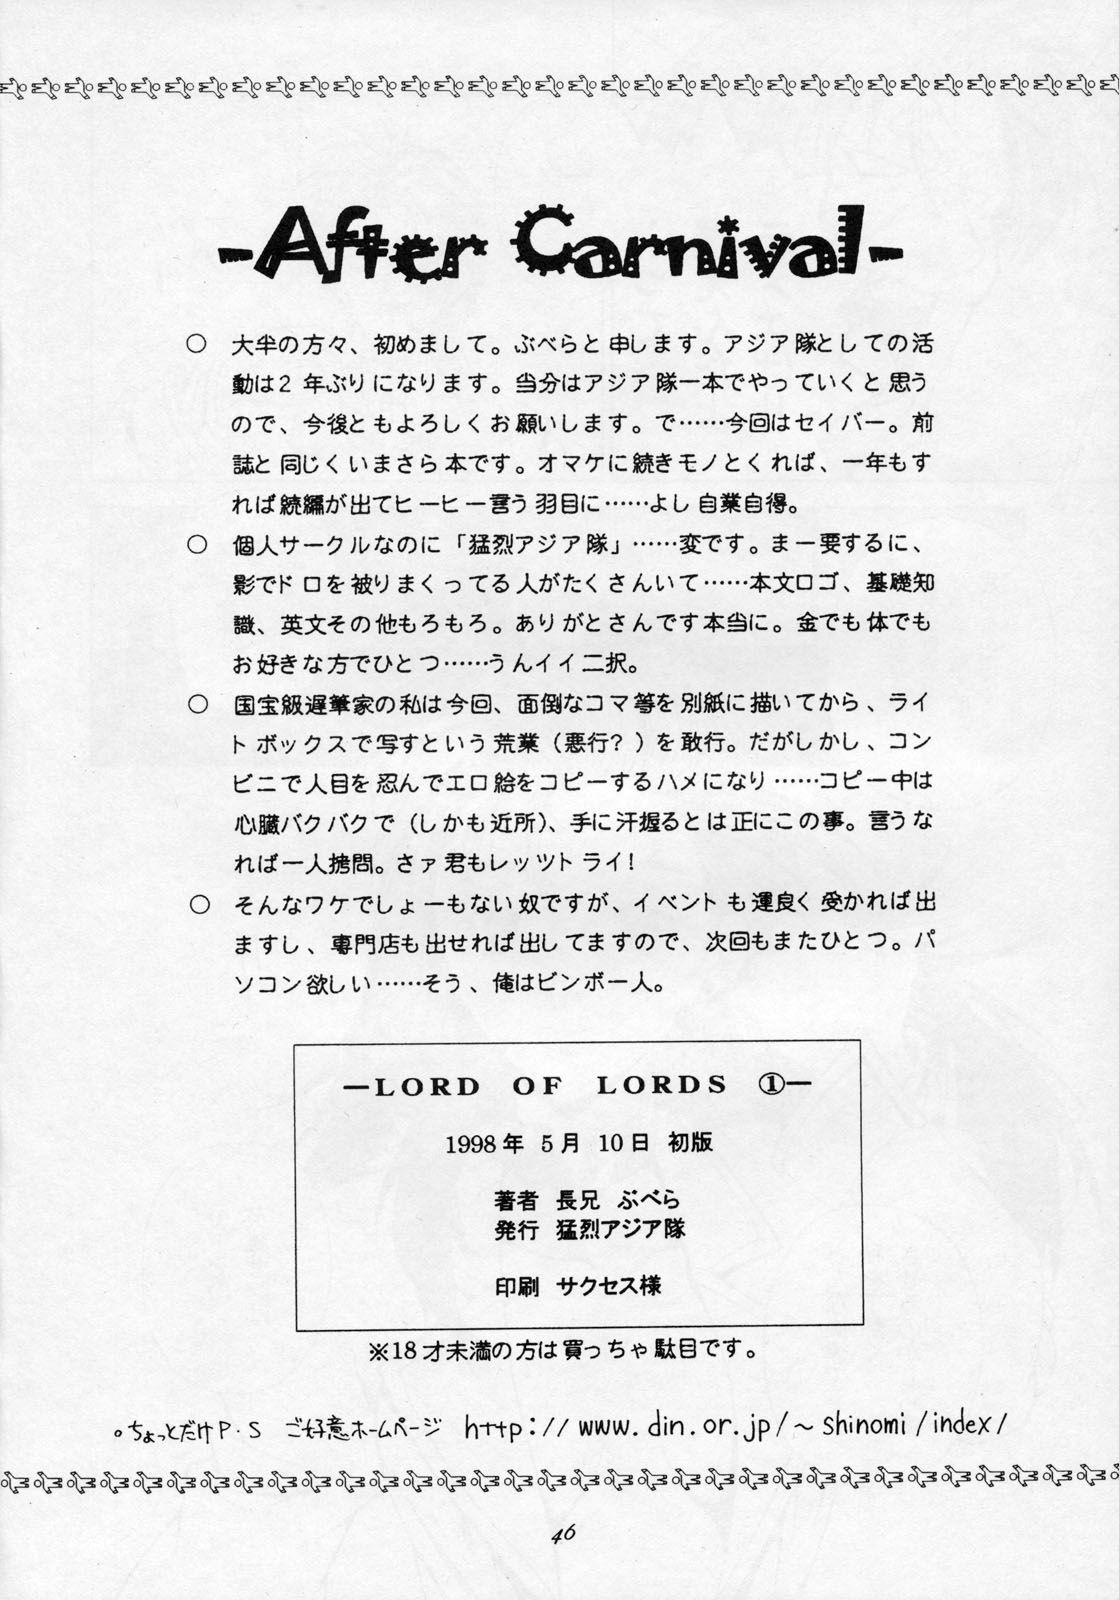 [Violence Asia Team] LORD OF LORDS vol.1 